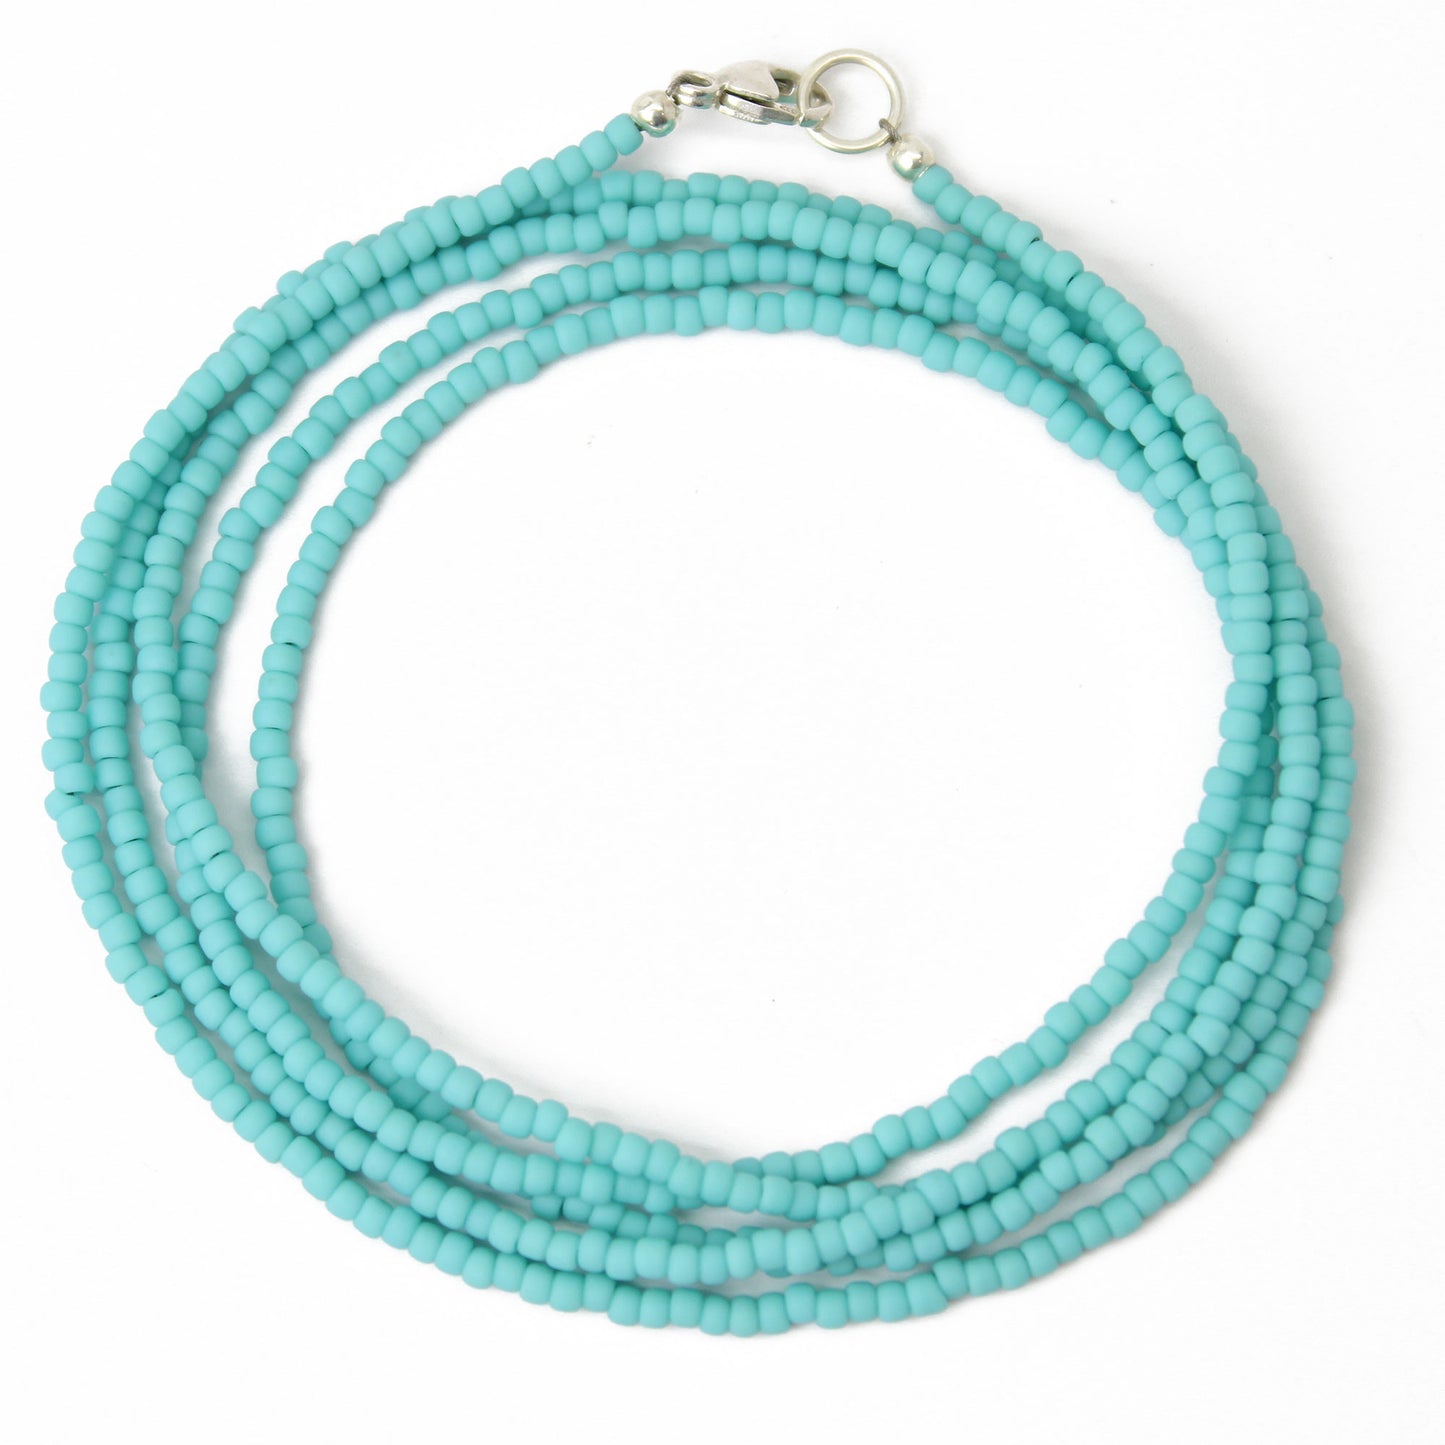 Turquoise Seed Bead Necklace- Matte Finish